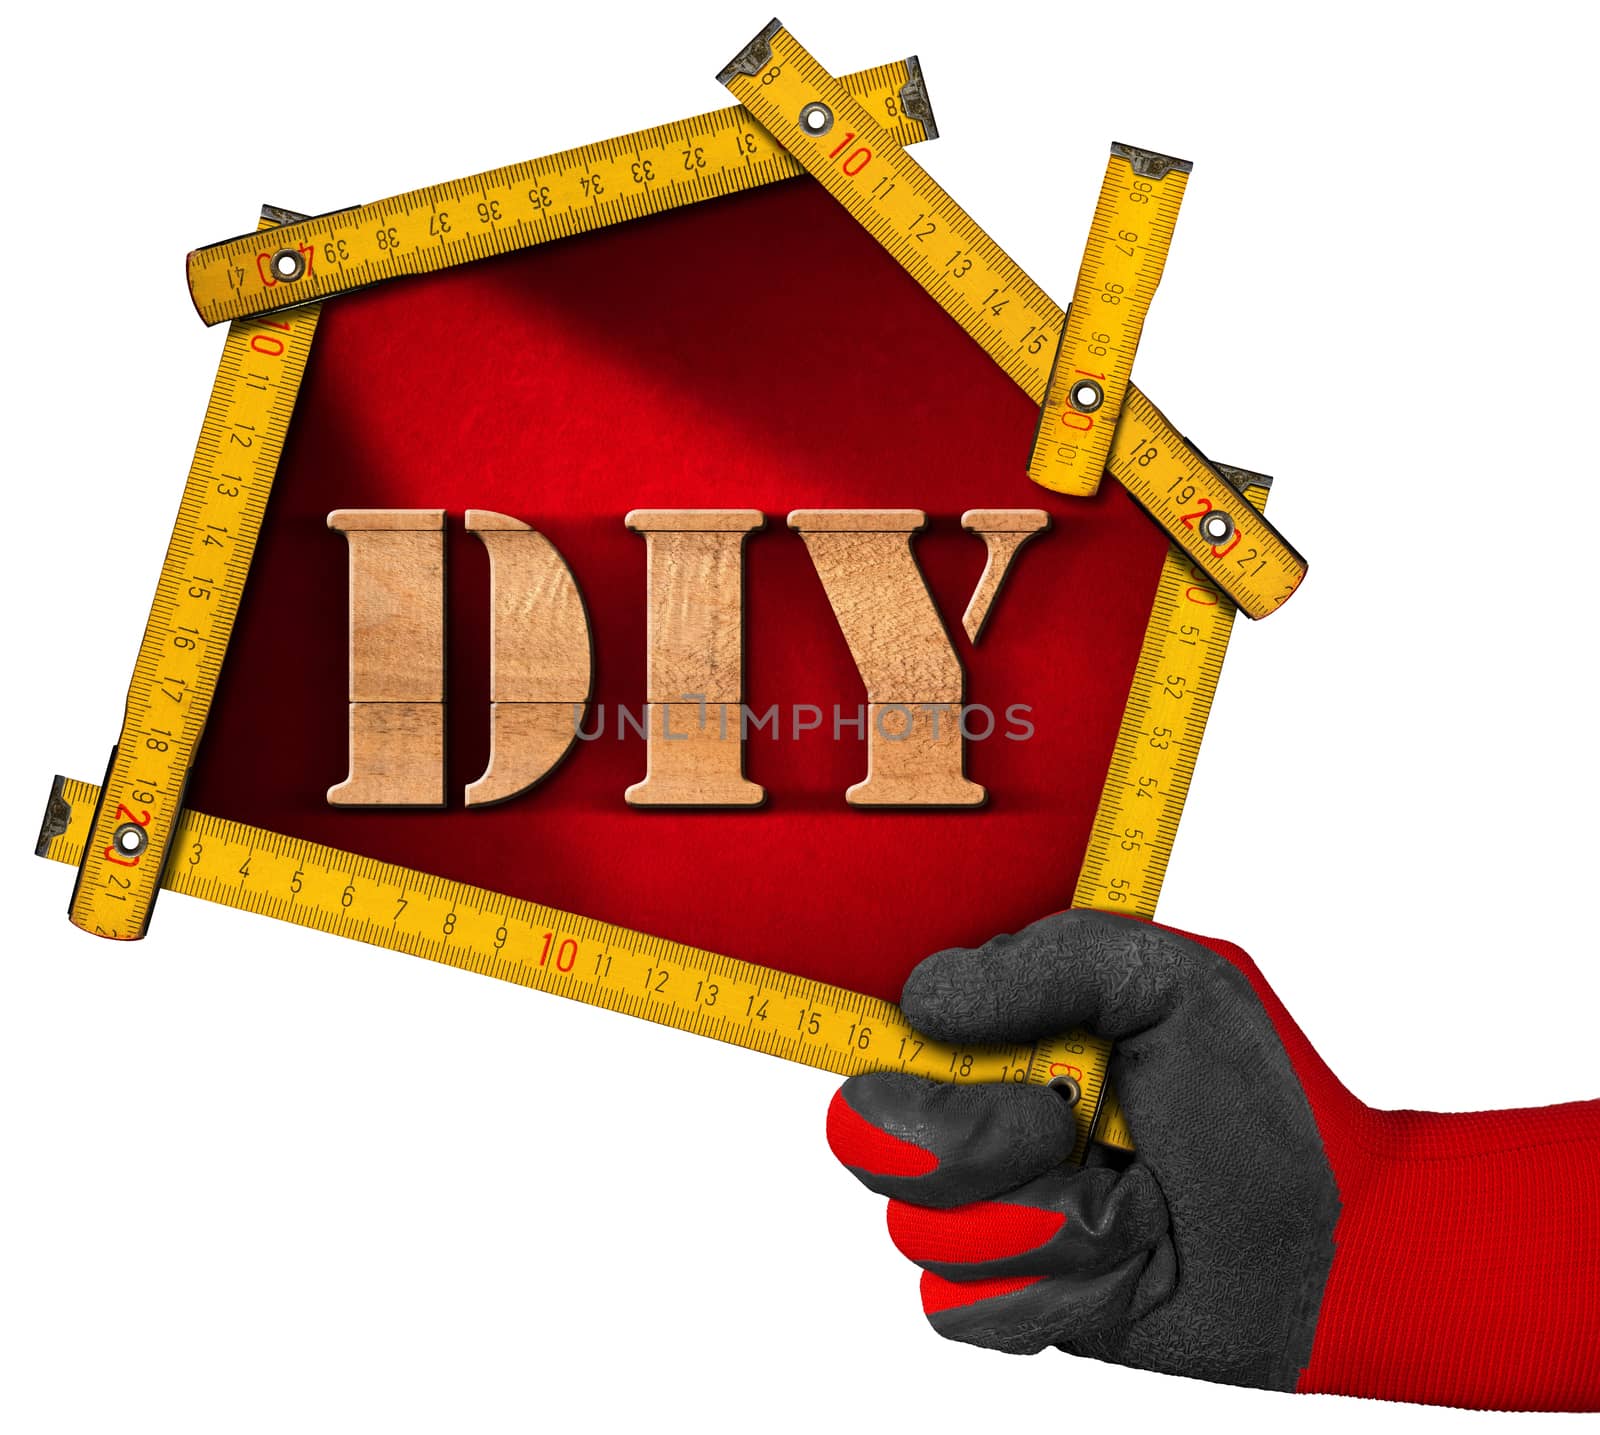 Hand with work glove holding a yellow wooden meter ruler in the shape of house with text Diy (Do it yourself). Isolated on white background